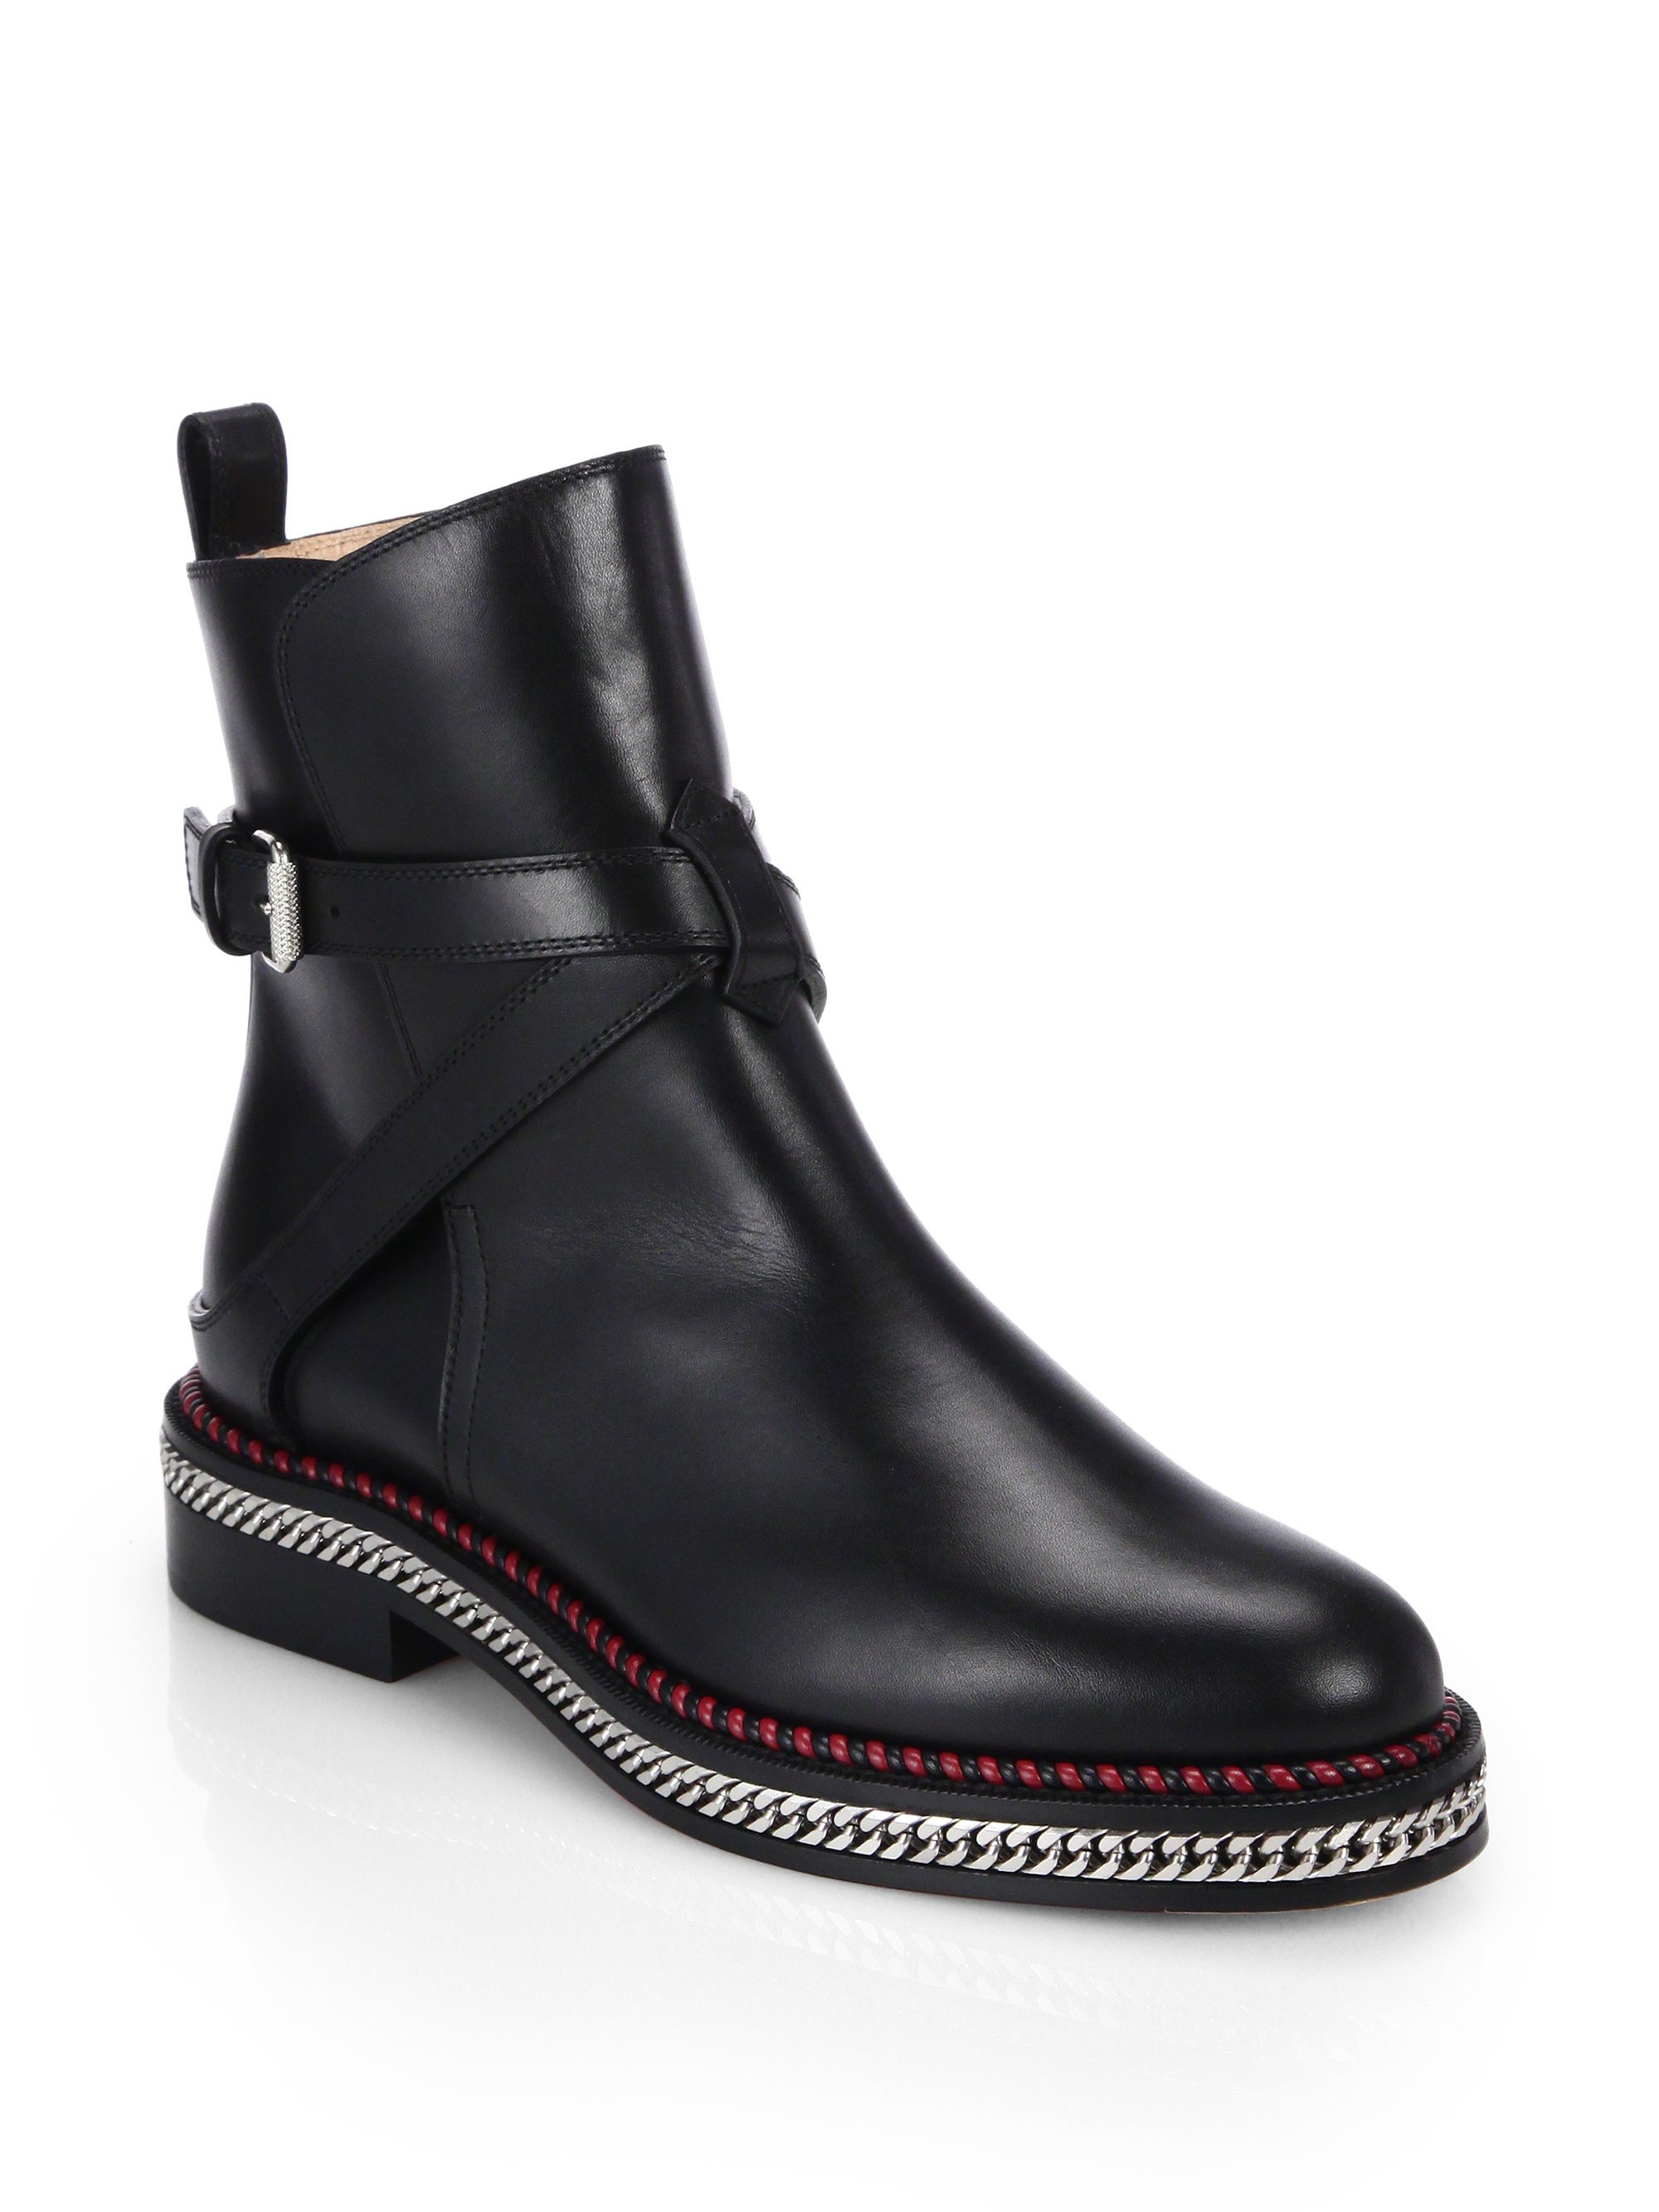 Lyst - Christian Louboutin Chelsea Chain-detail Leather Ankle Boots in